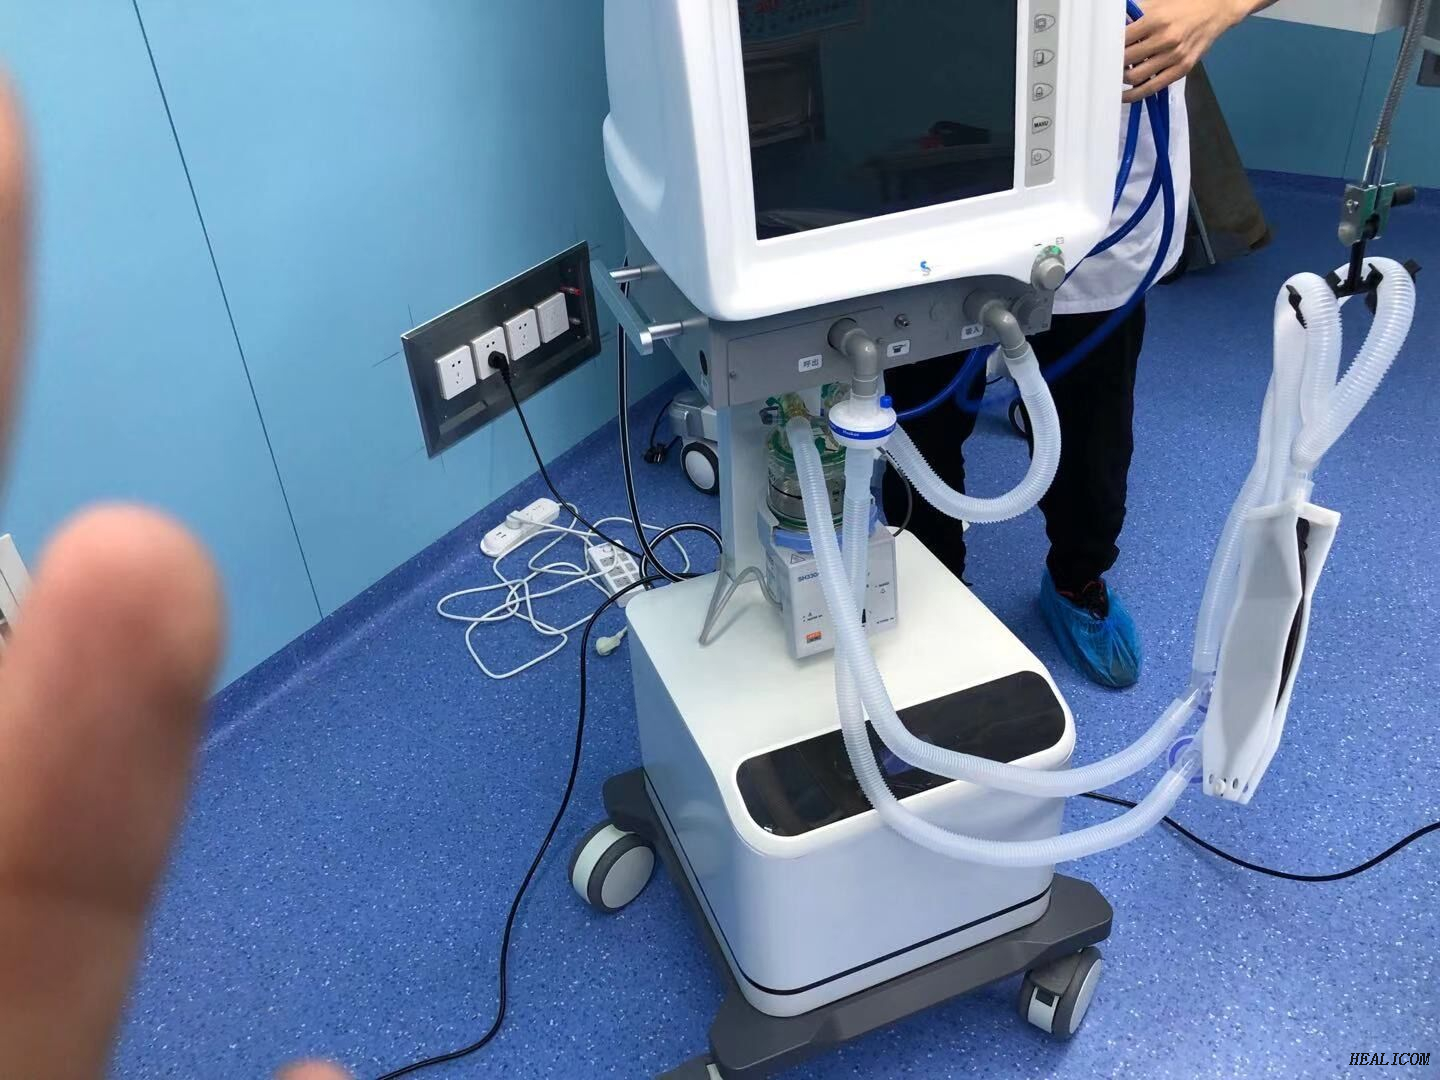 HS-1100 Medical Surgical Hospital Equipment Mobile Trolley Breathing Machine ICU Ventilator Machine for Human or Infant Use